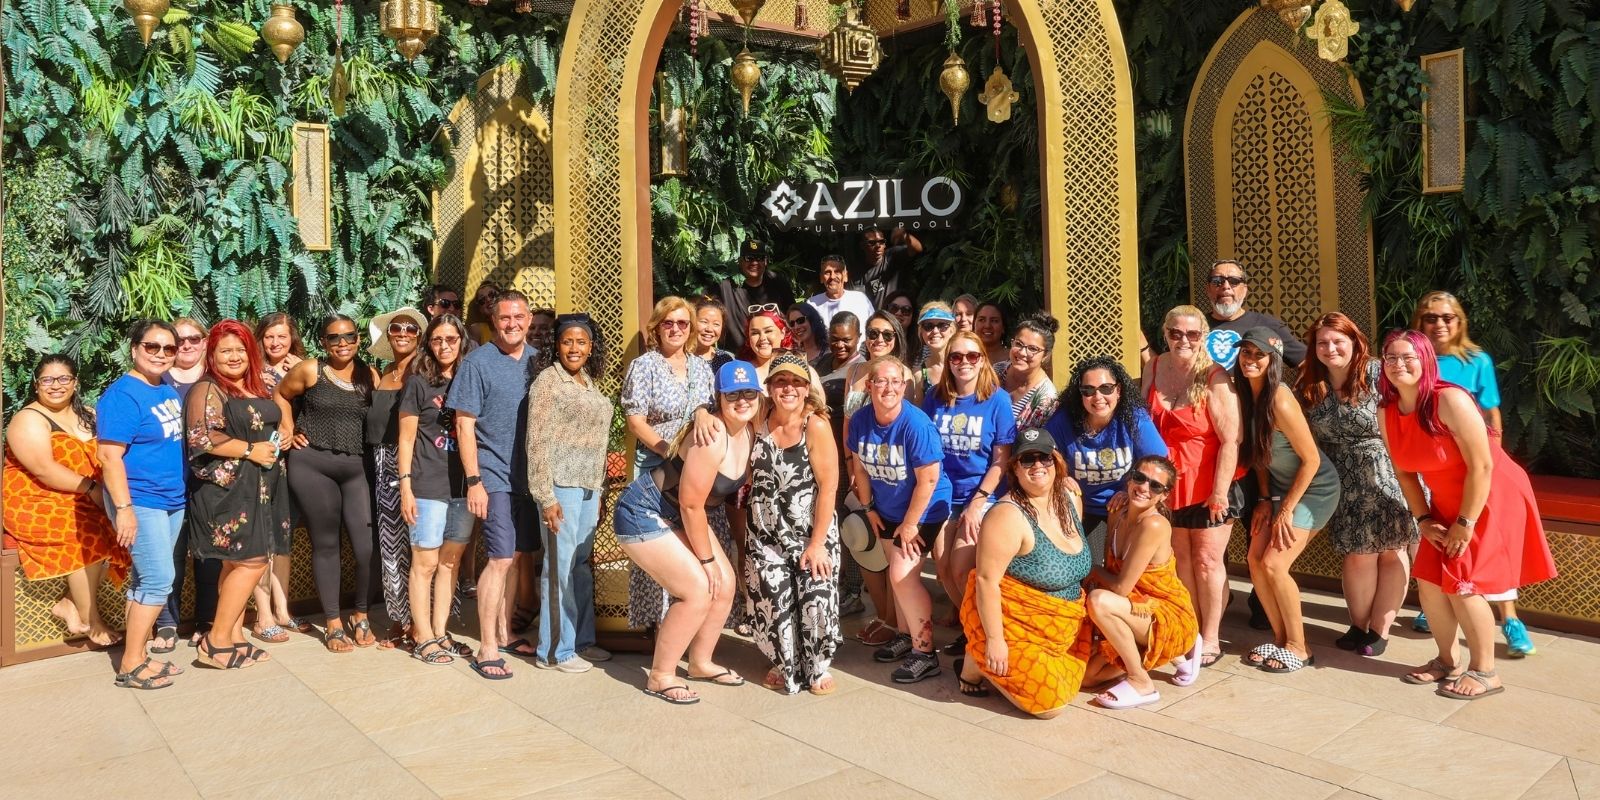 A picture showing all of the teachers from a local elementary school at the AZILO Ultra Pool lined up for a group picture.